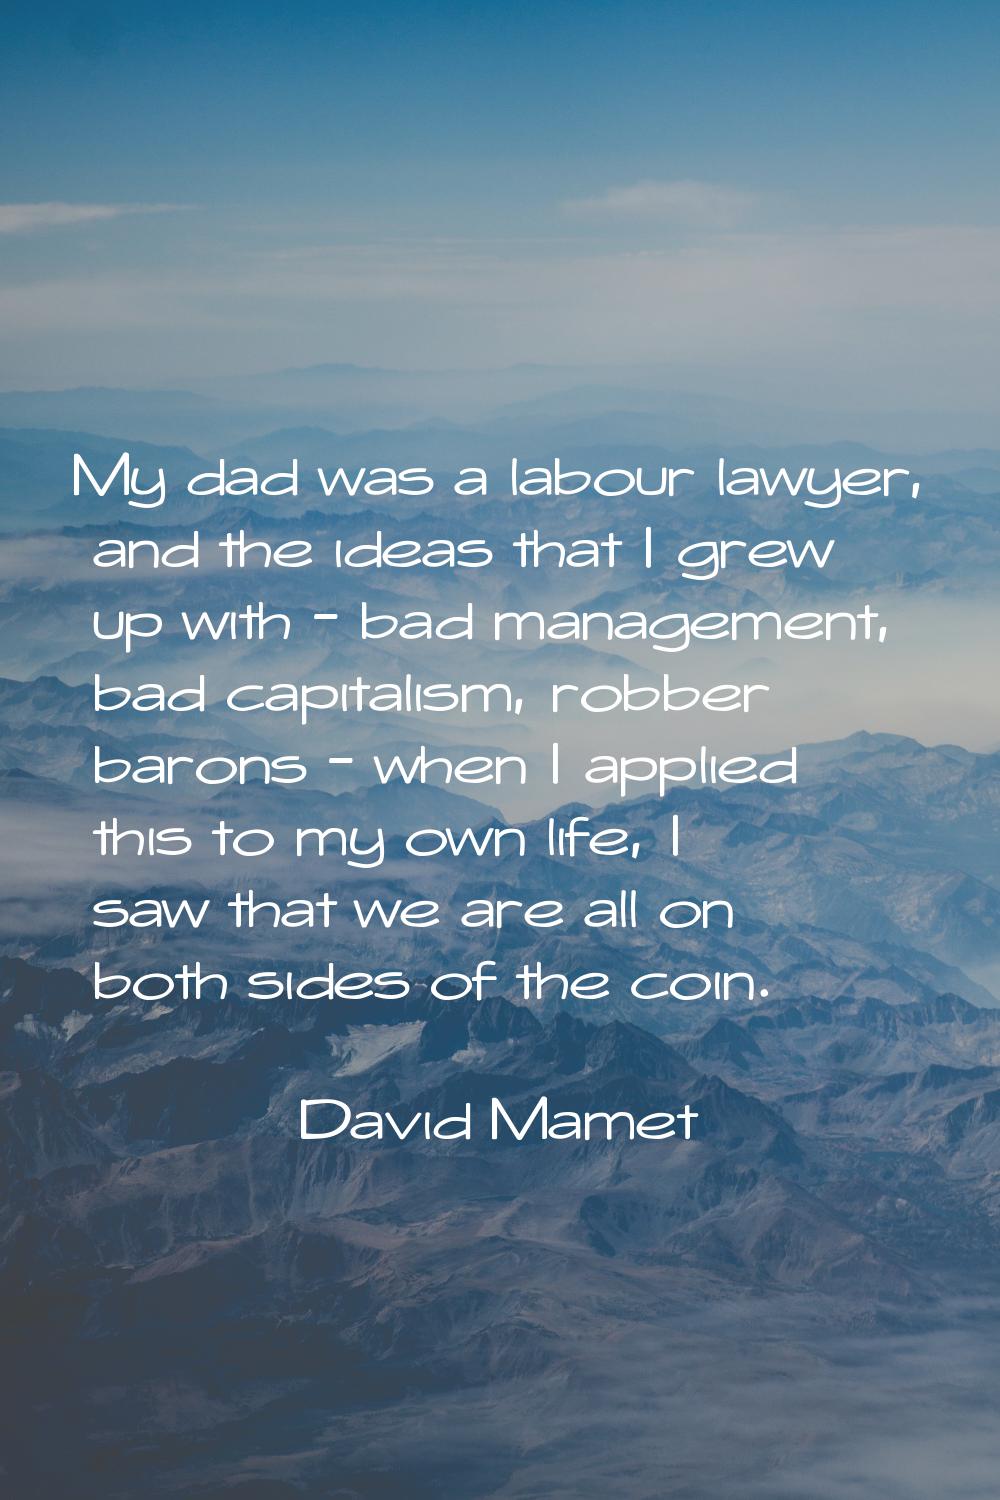 My dad was a labour lawyer, and the ideas that I grew up with - bad management, bad capitalism, rob